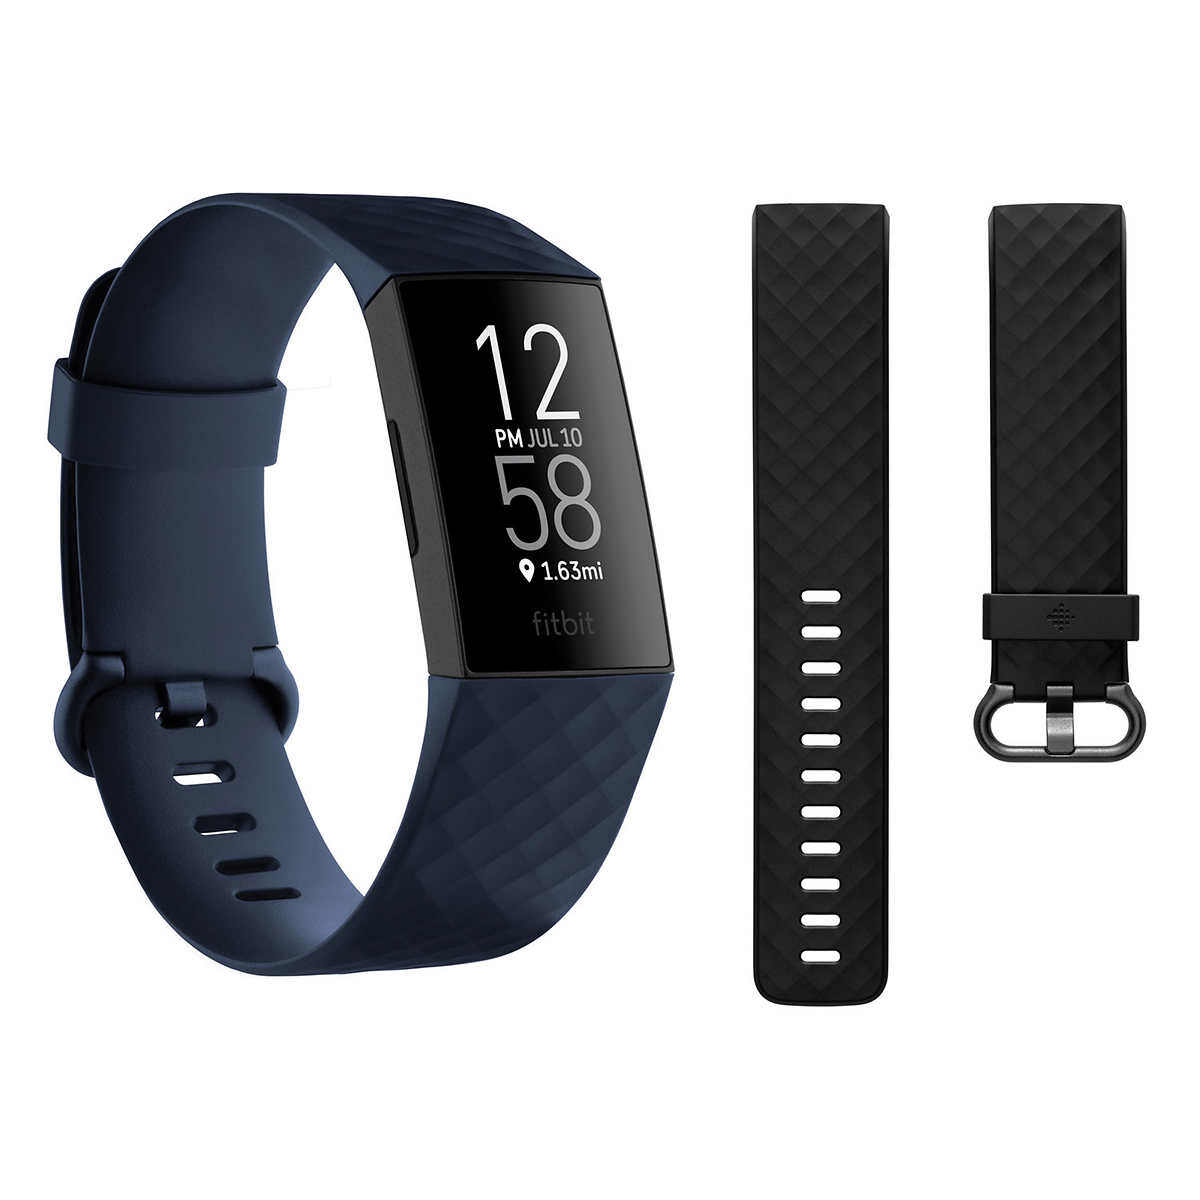 fitbit charge 4 cheapest price